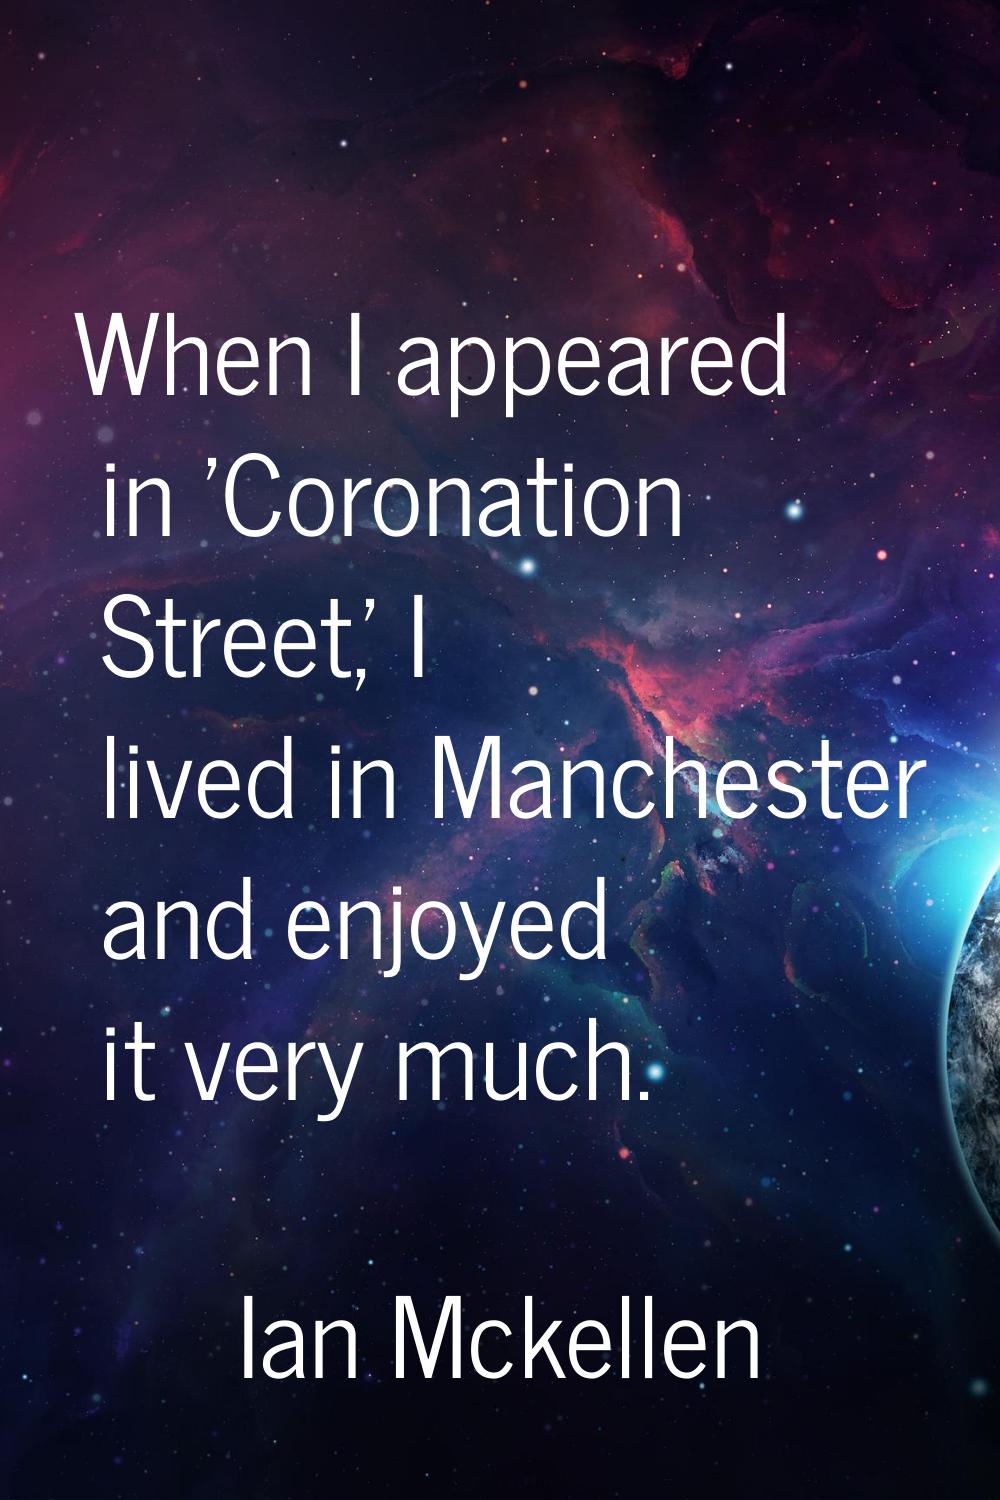 When I appeared in 'Coronation Street,' I lived in Manchester and enjoyed it very much.